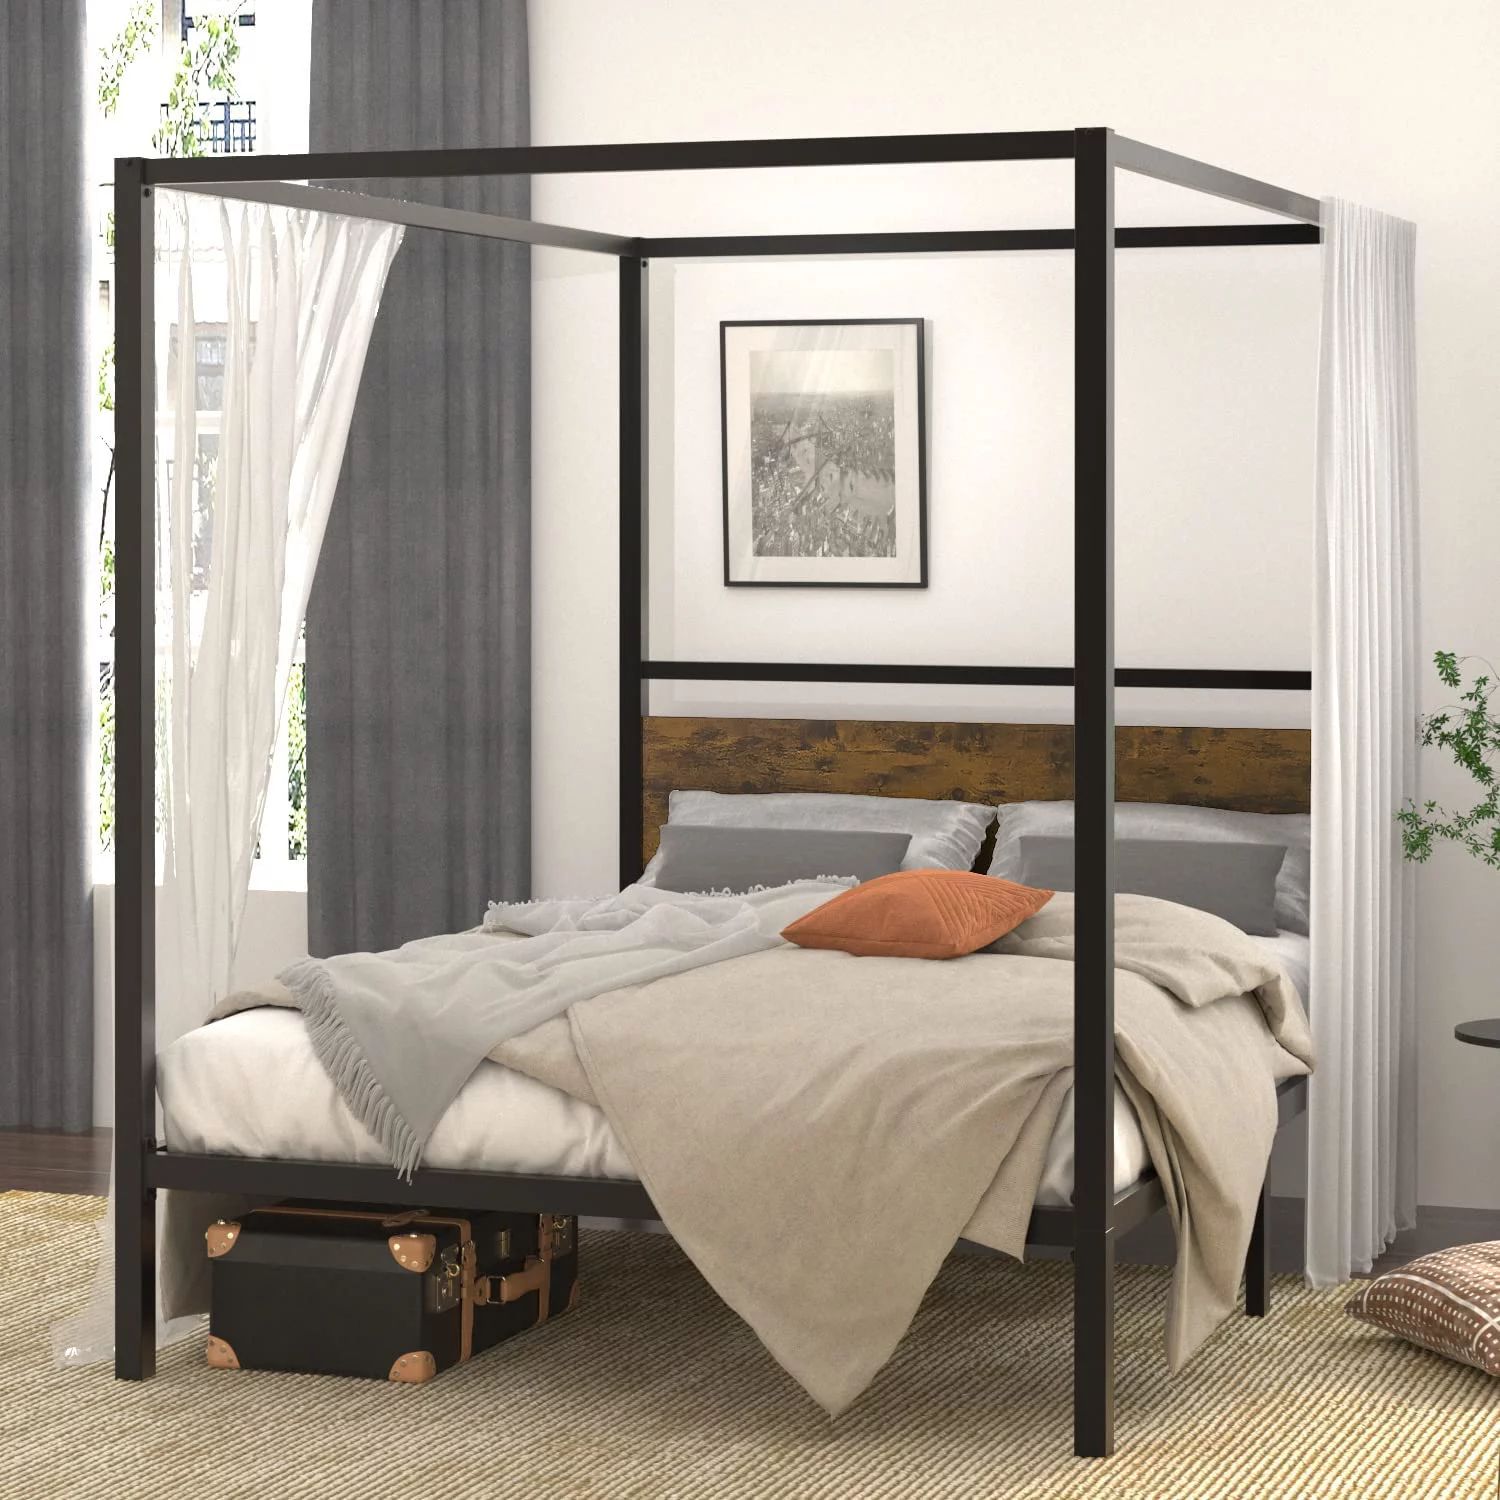 Sha Cerlin Queen Size Metal Four-Poster Canopy Bed Frame with Wooden Headboard, Industrial Style | Walmart (US)